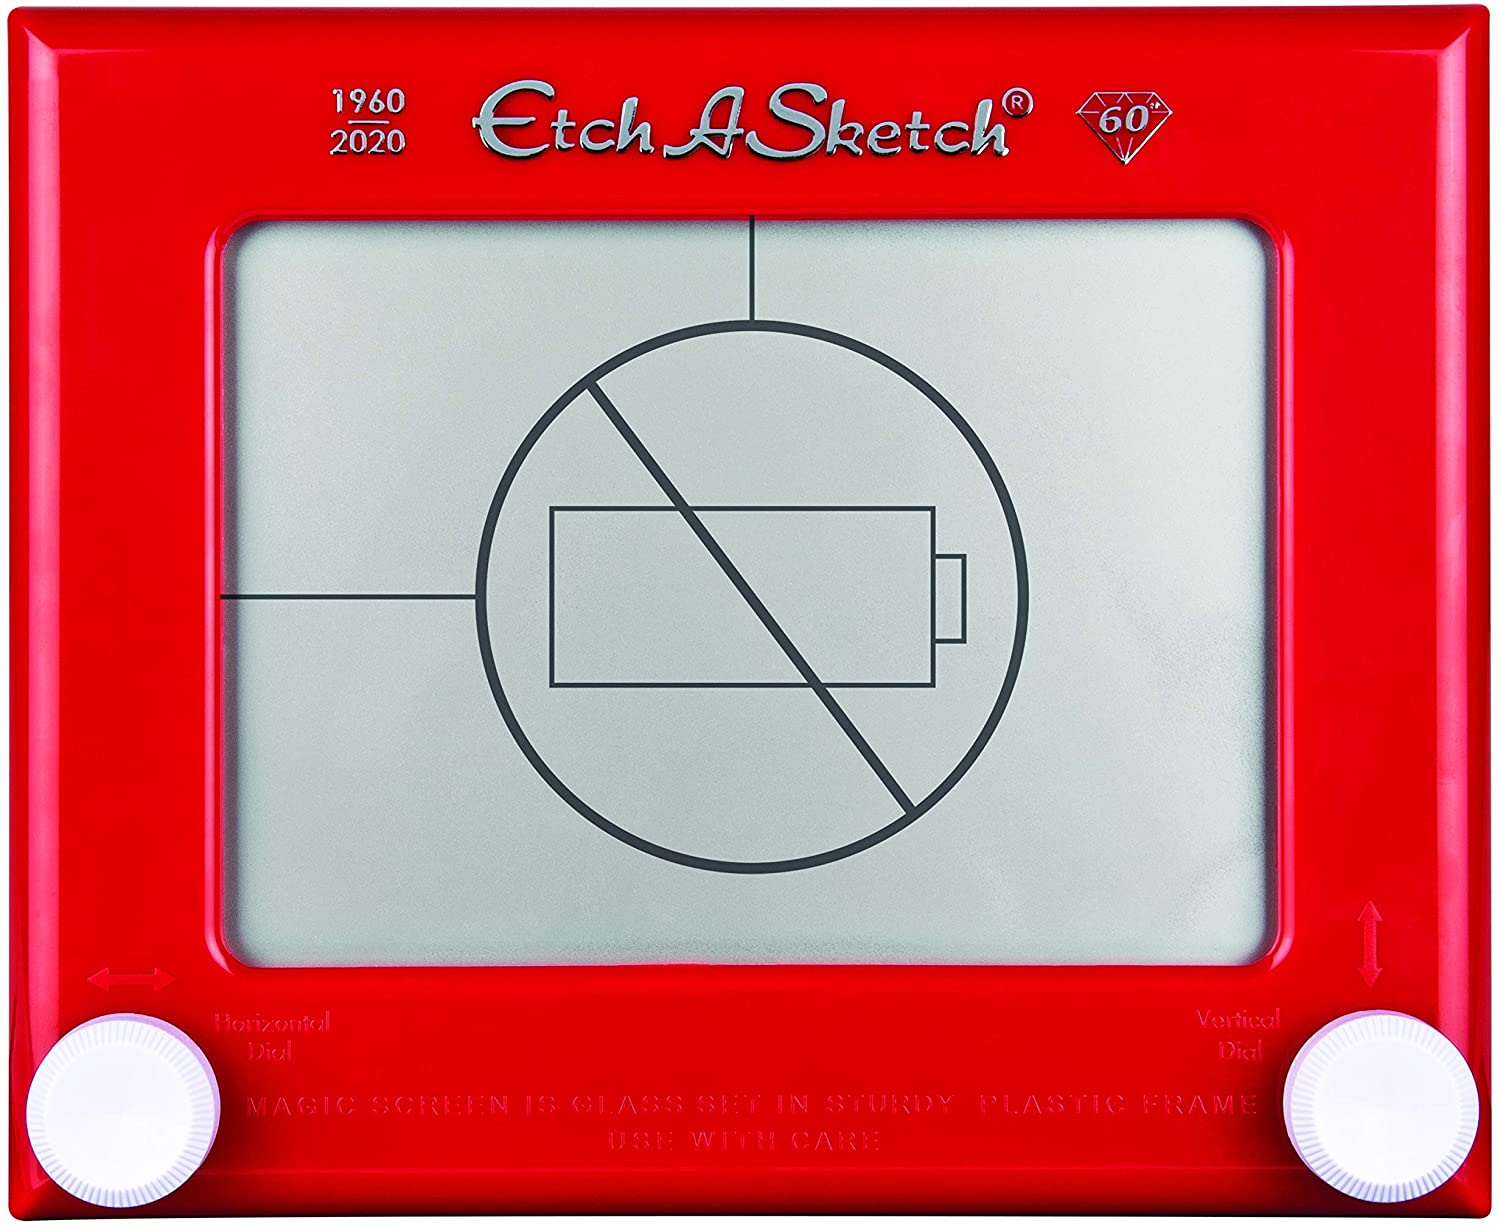 Ohio Art Pocket Etch A Sketch - Pocket Etch A Sketch . Buy No Character  toys in India. shop for Ohio Art products in India. | Flipkart.com